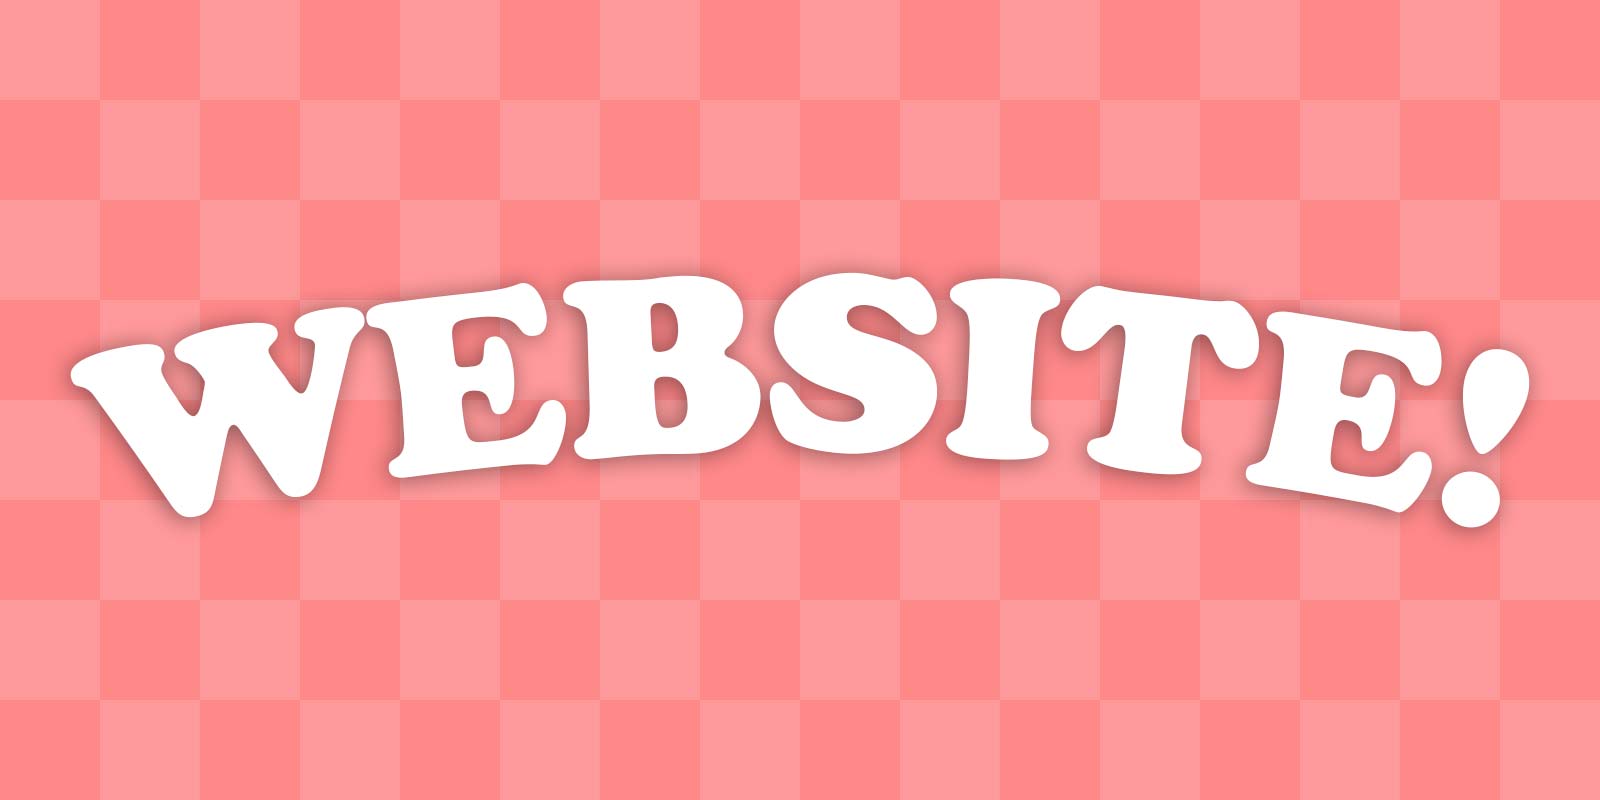 The word "website" in the Cooper typeface over a pink checkerboard background.